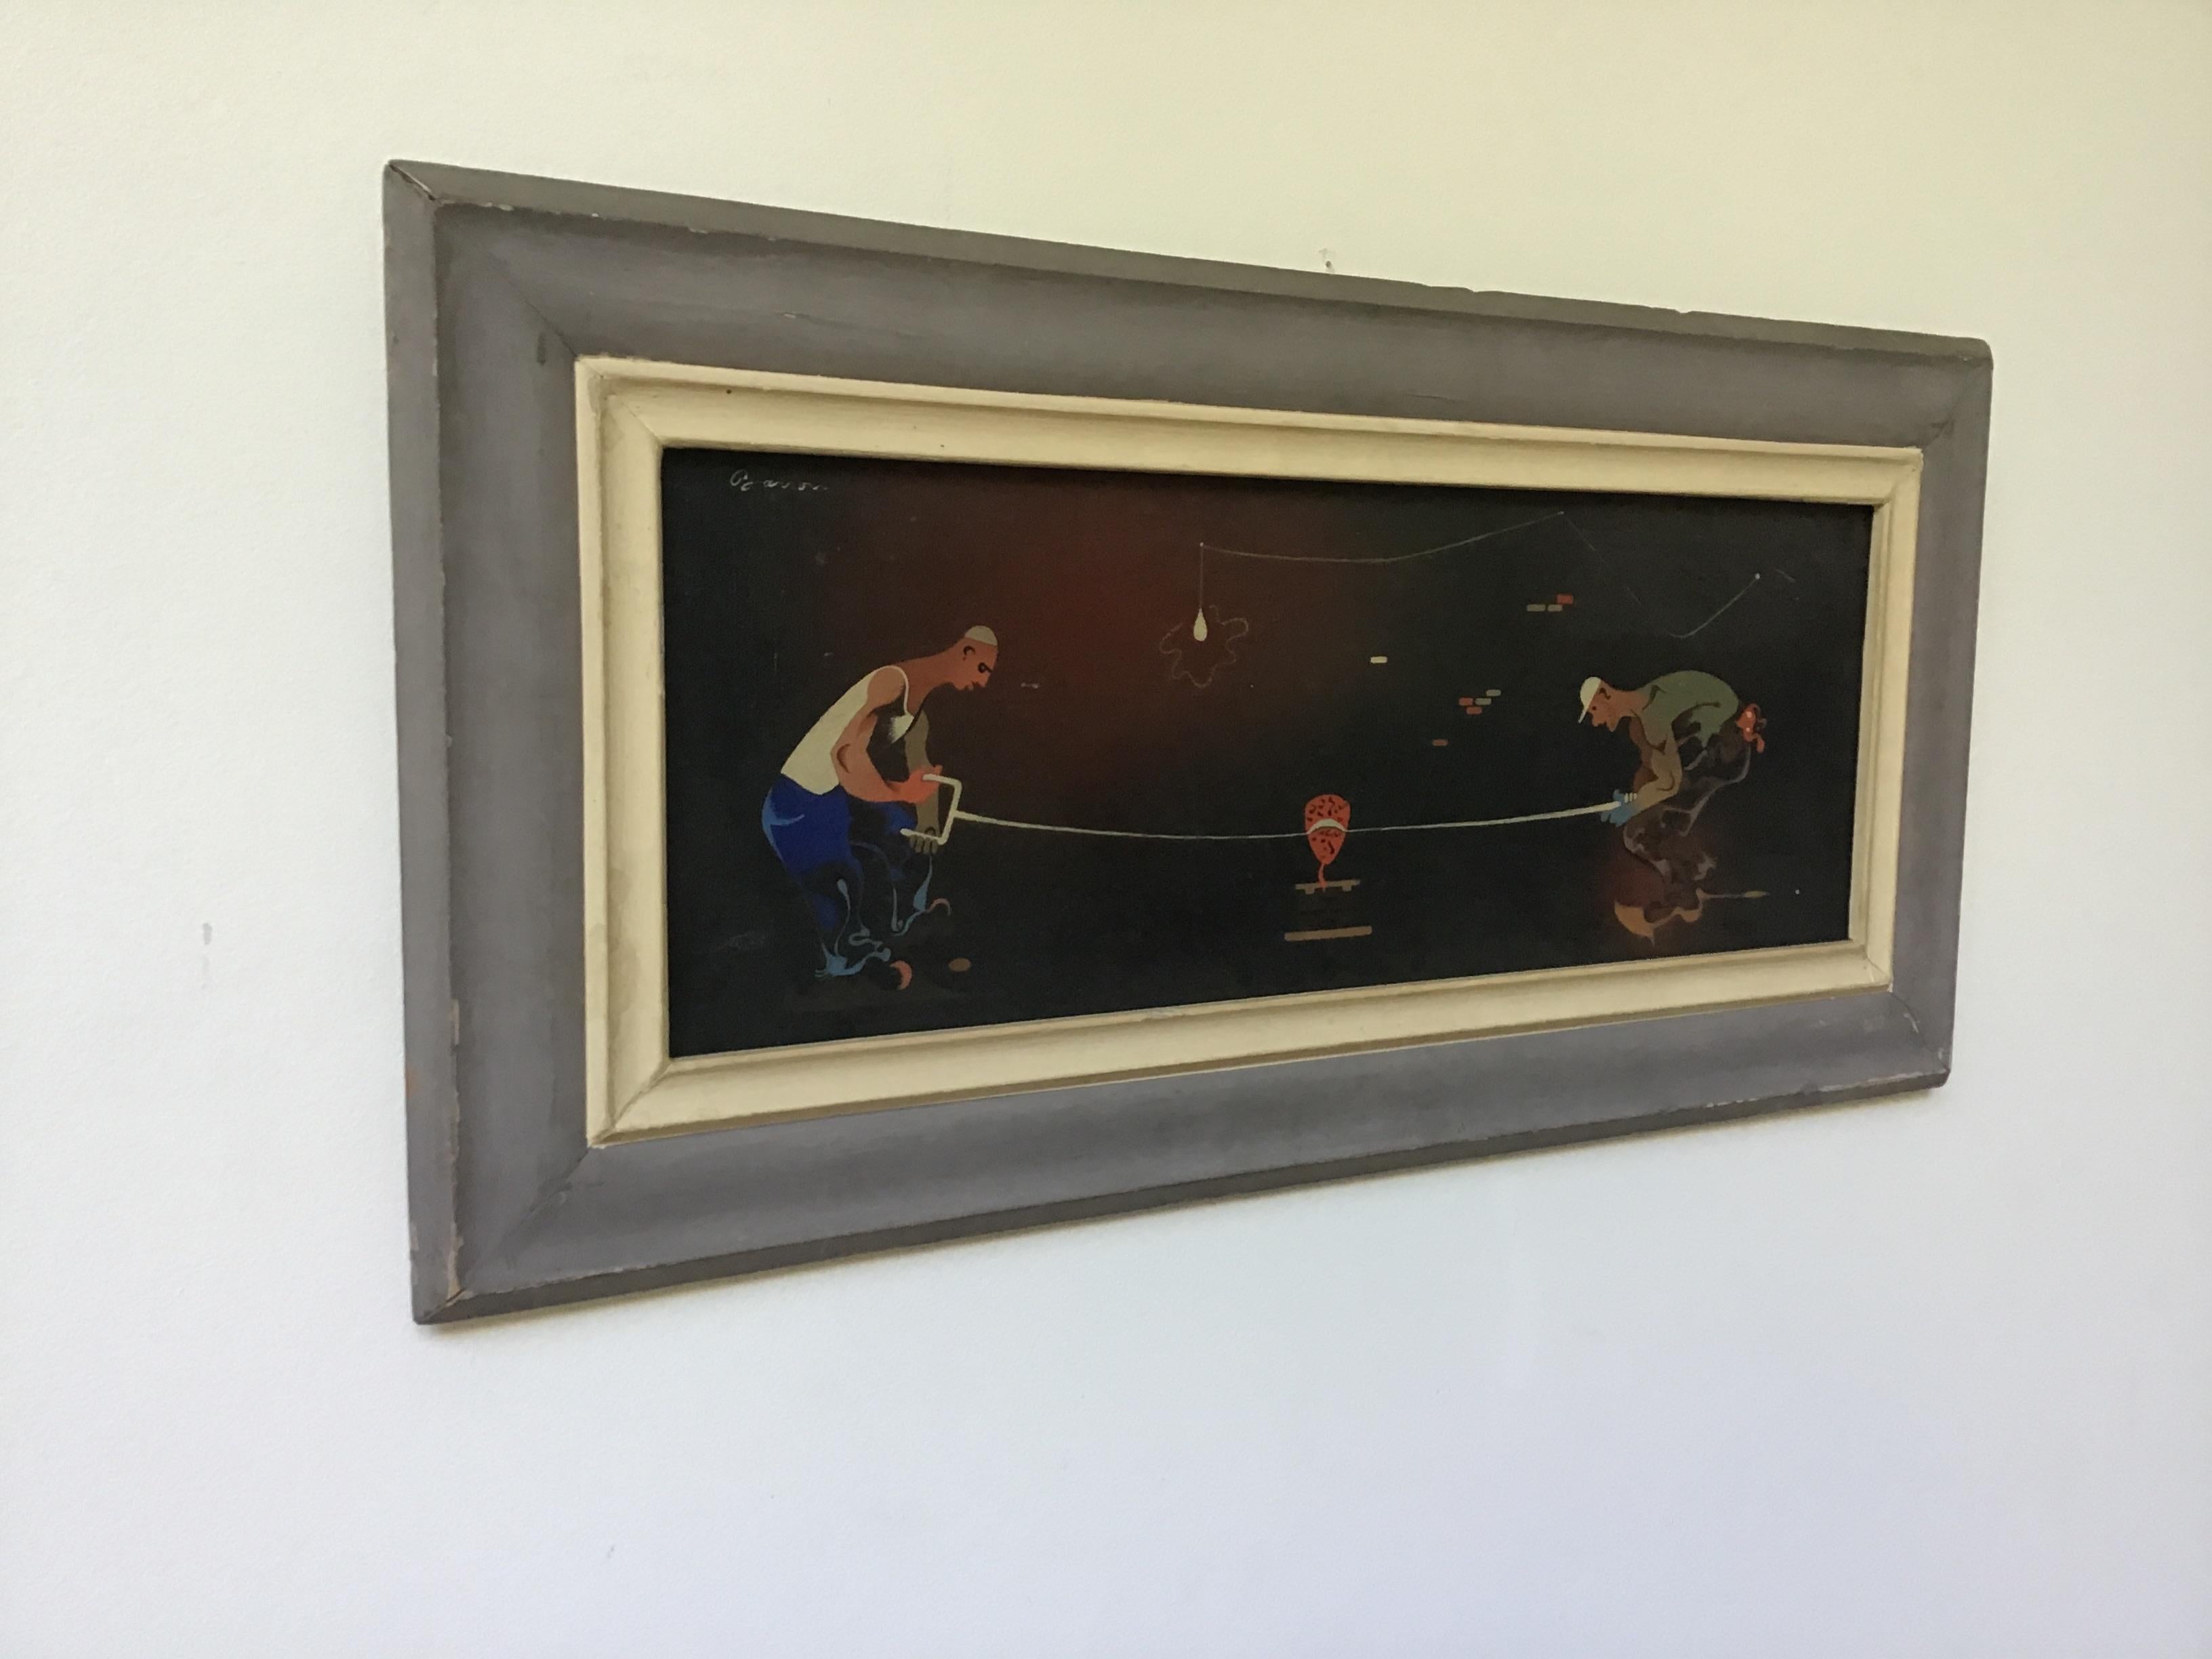 1940s oil on canvas of 2 workers sawing. Signed.